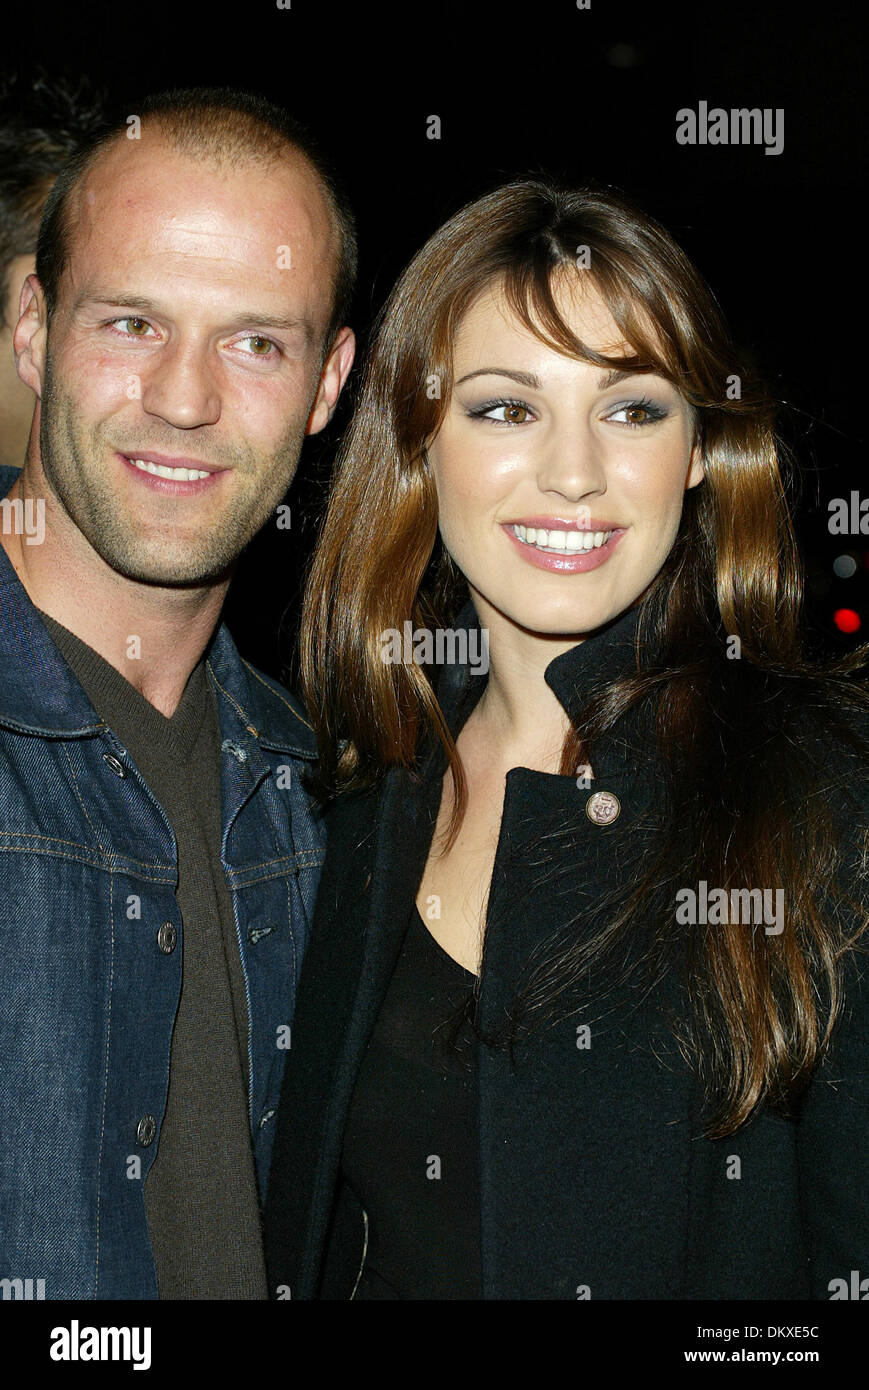 JASON STATHAM & KELLY BROOK.ACTOR & MODEL BEVERLY HILLS, LOS ANGELES,.ACADEMY OF MOTION PICTURE ARTS.16/10/2002.LAC10064. Stock Photo